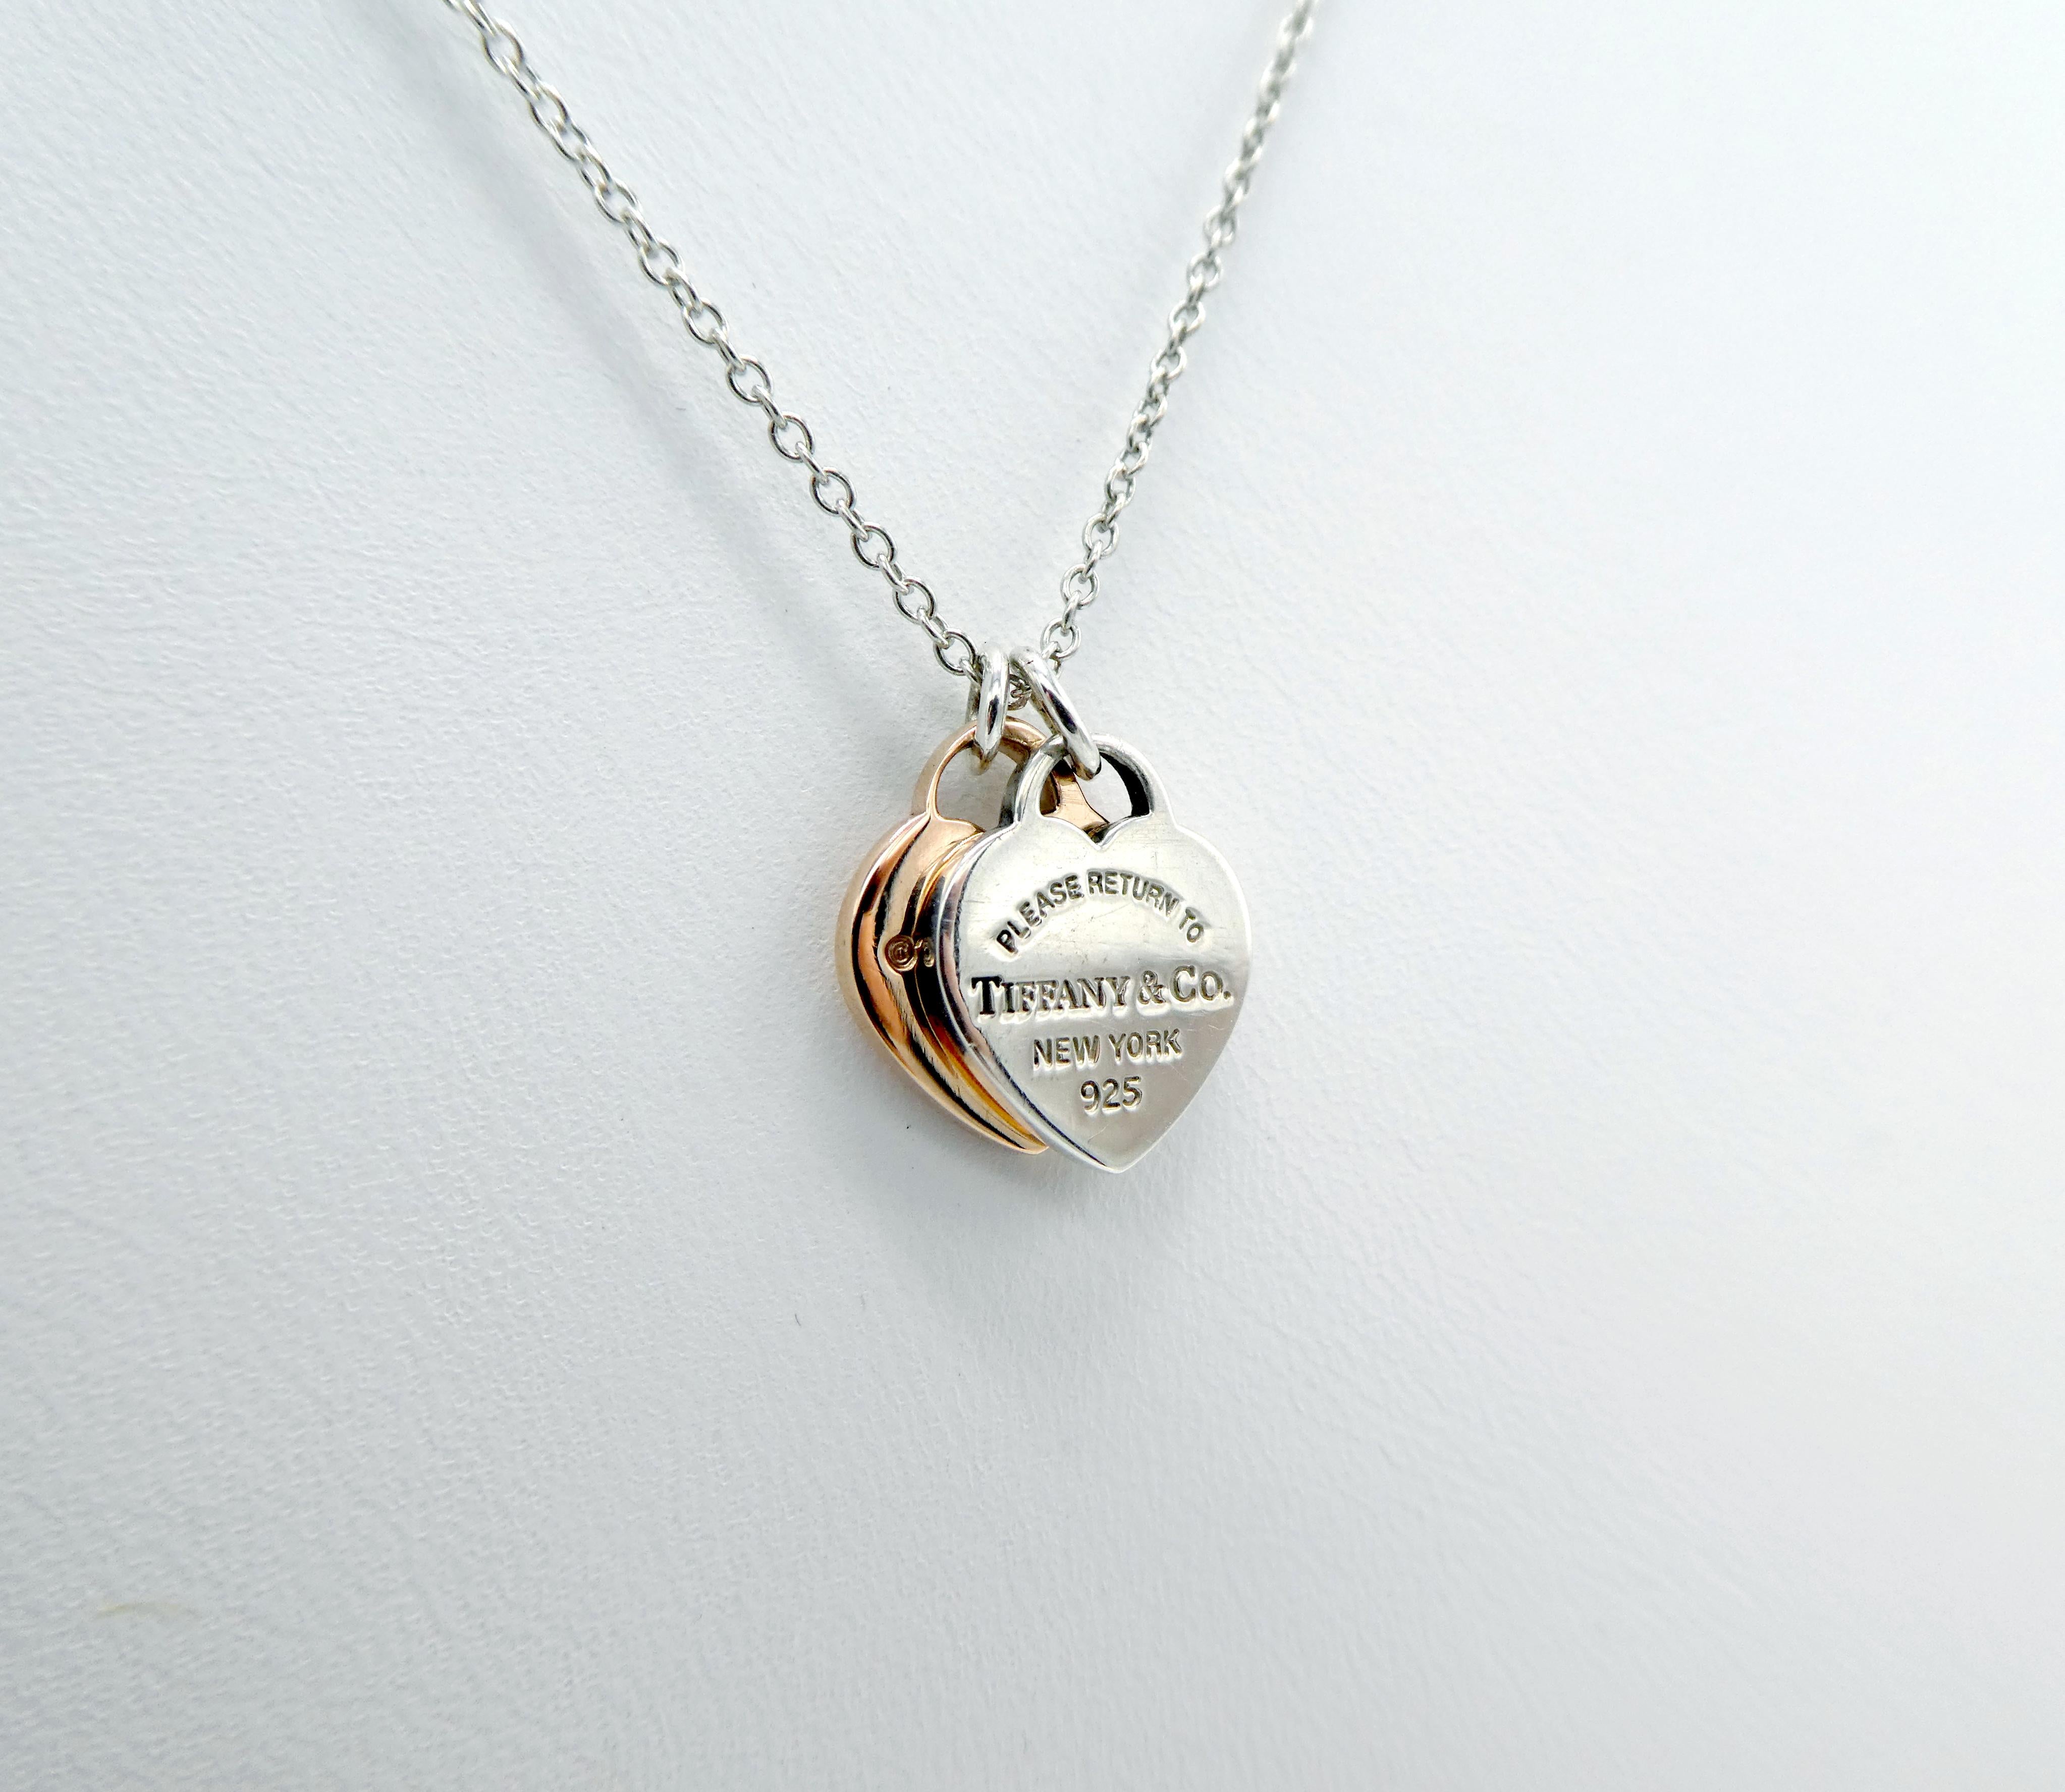 Tiffany & Co. Sterling Silver Return to Tiffany Double Heart Tag Pendant Necklace

Metal: Sterling silver and Rubedo® metal
Signed: 